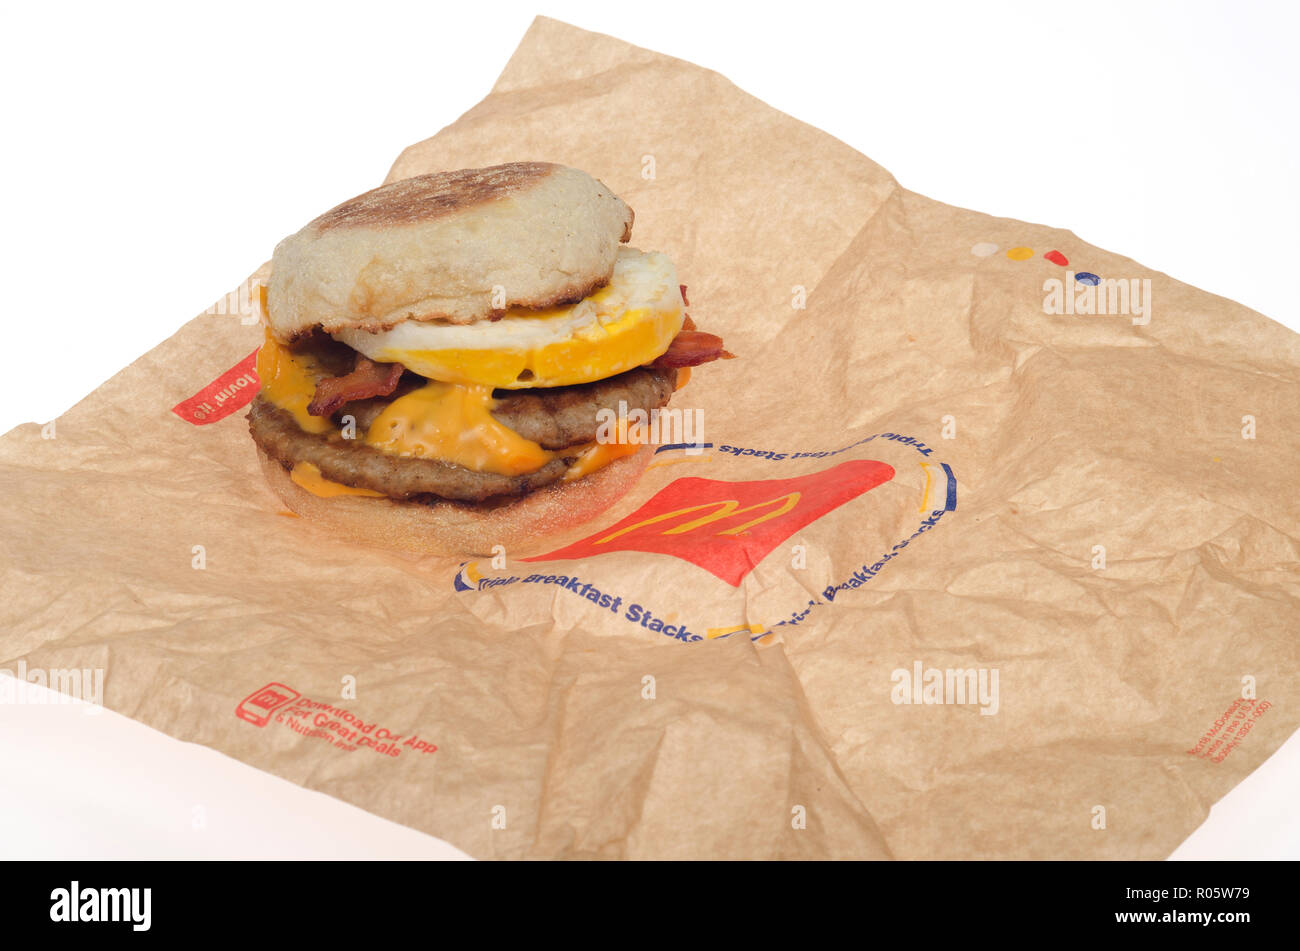 McDonald's new breakfast sandwich, the Triple Stack with 2 sausage patties, 2 slices american cheese, 2 strips of bacon, an egg on an english muffin Stock Photo